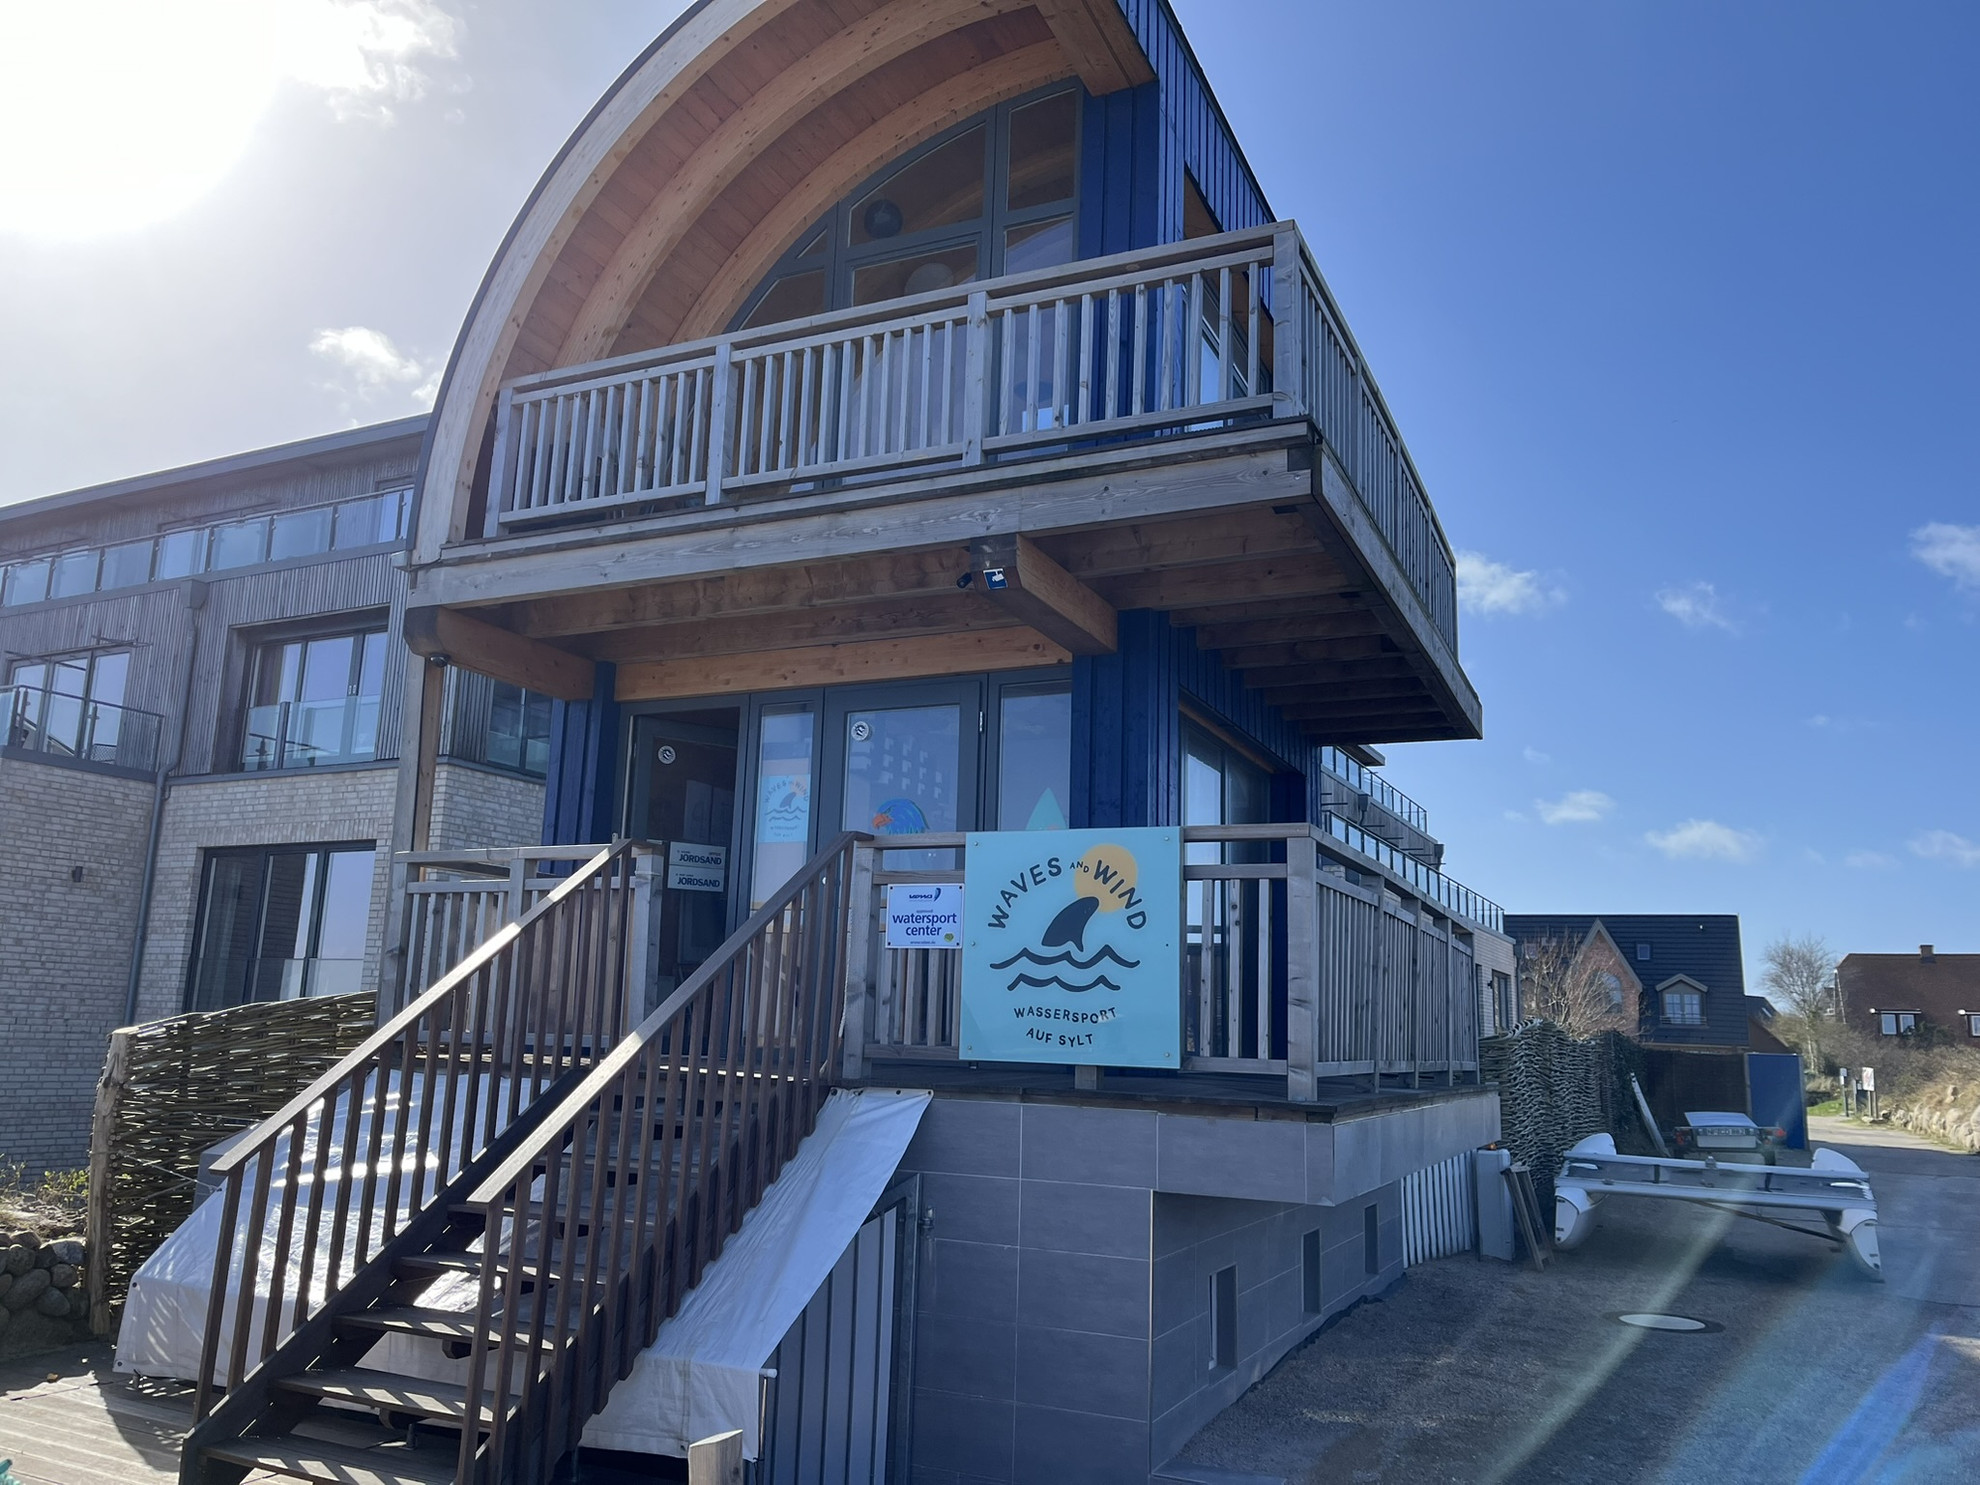 "Waves and Wind" Surfschule in List auf Sylt